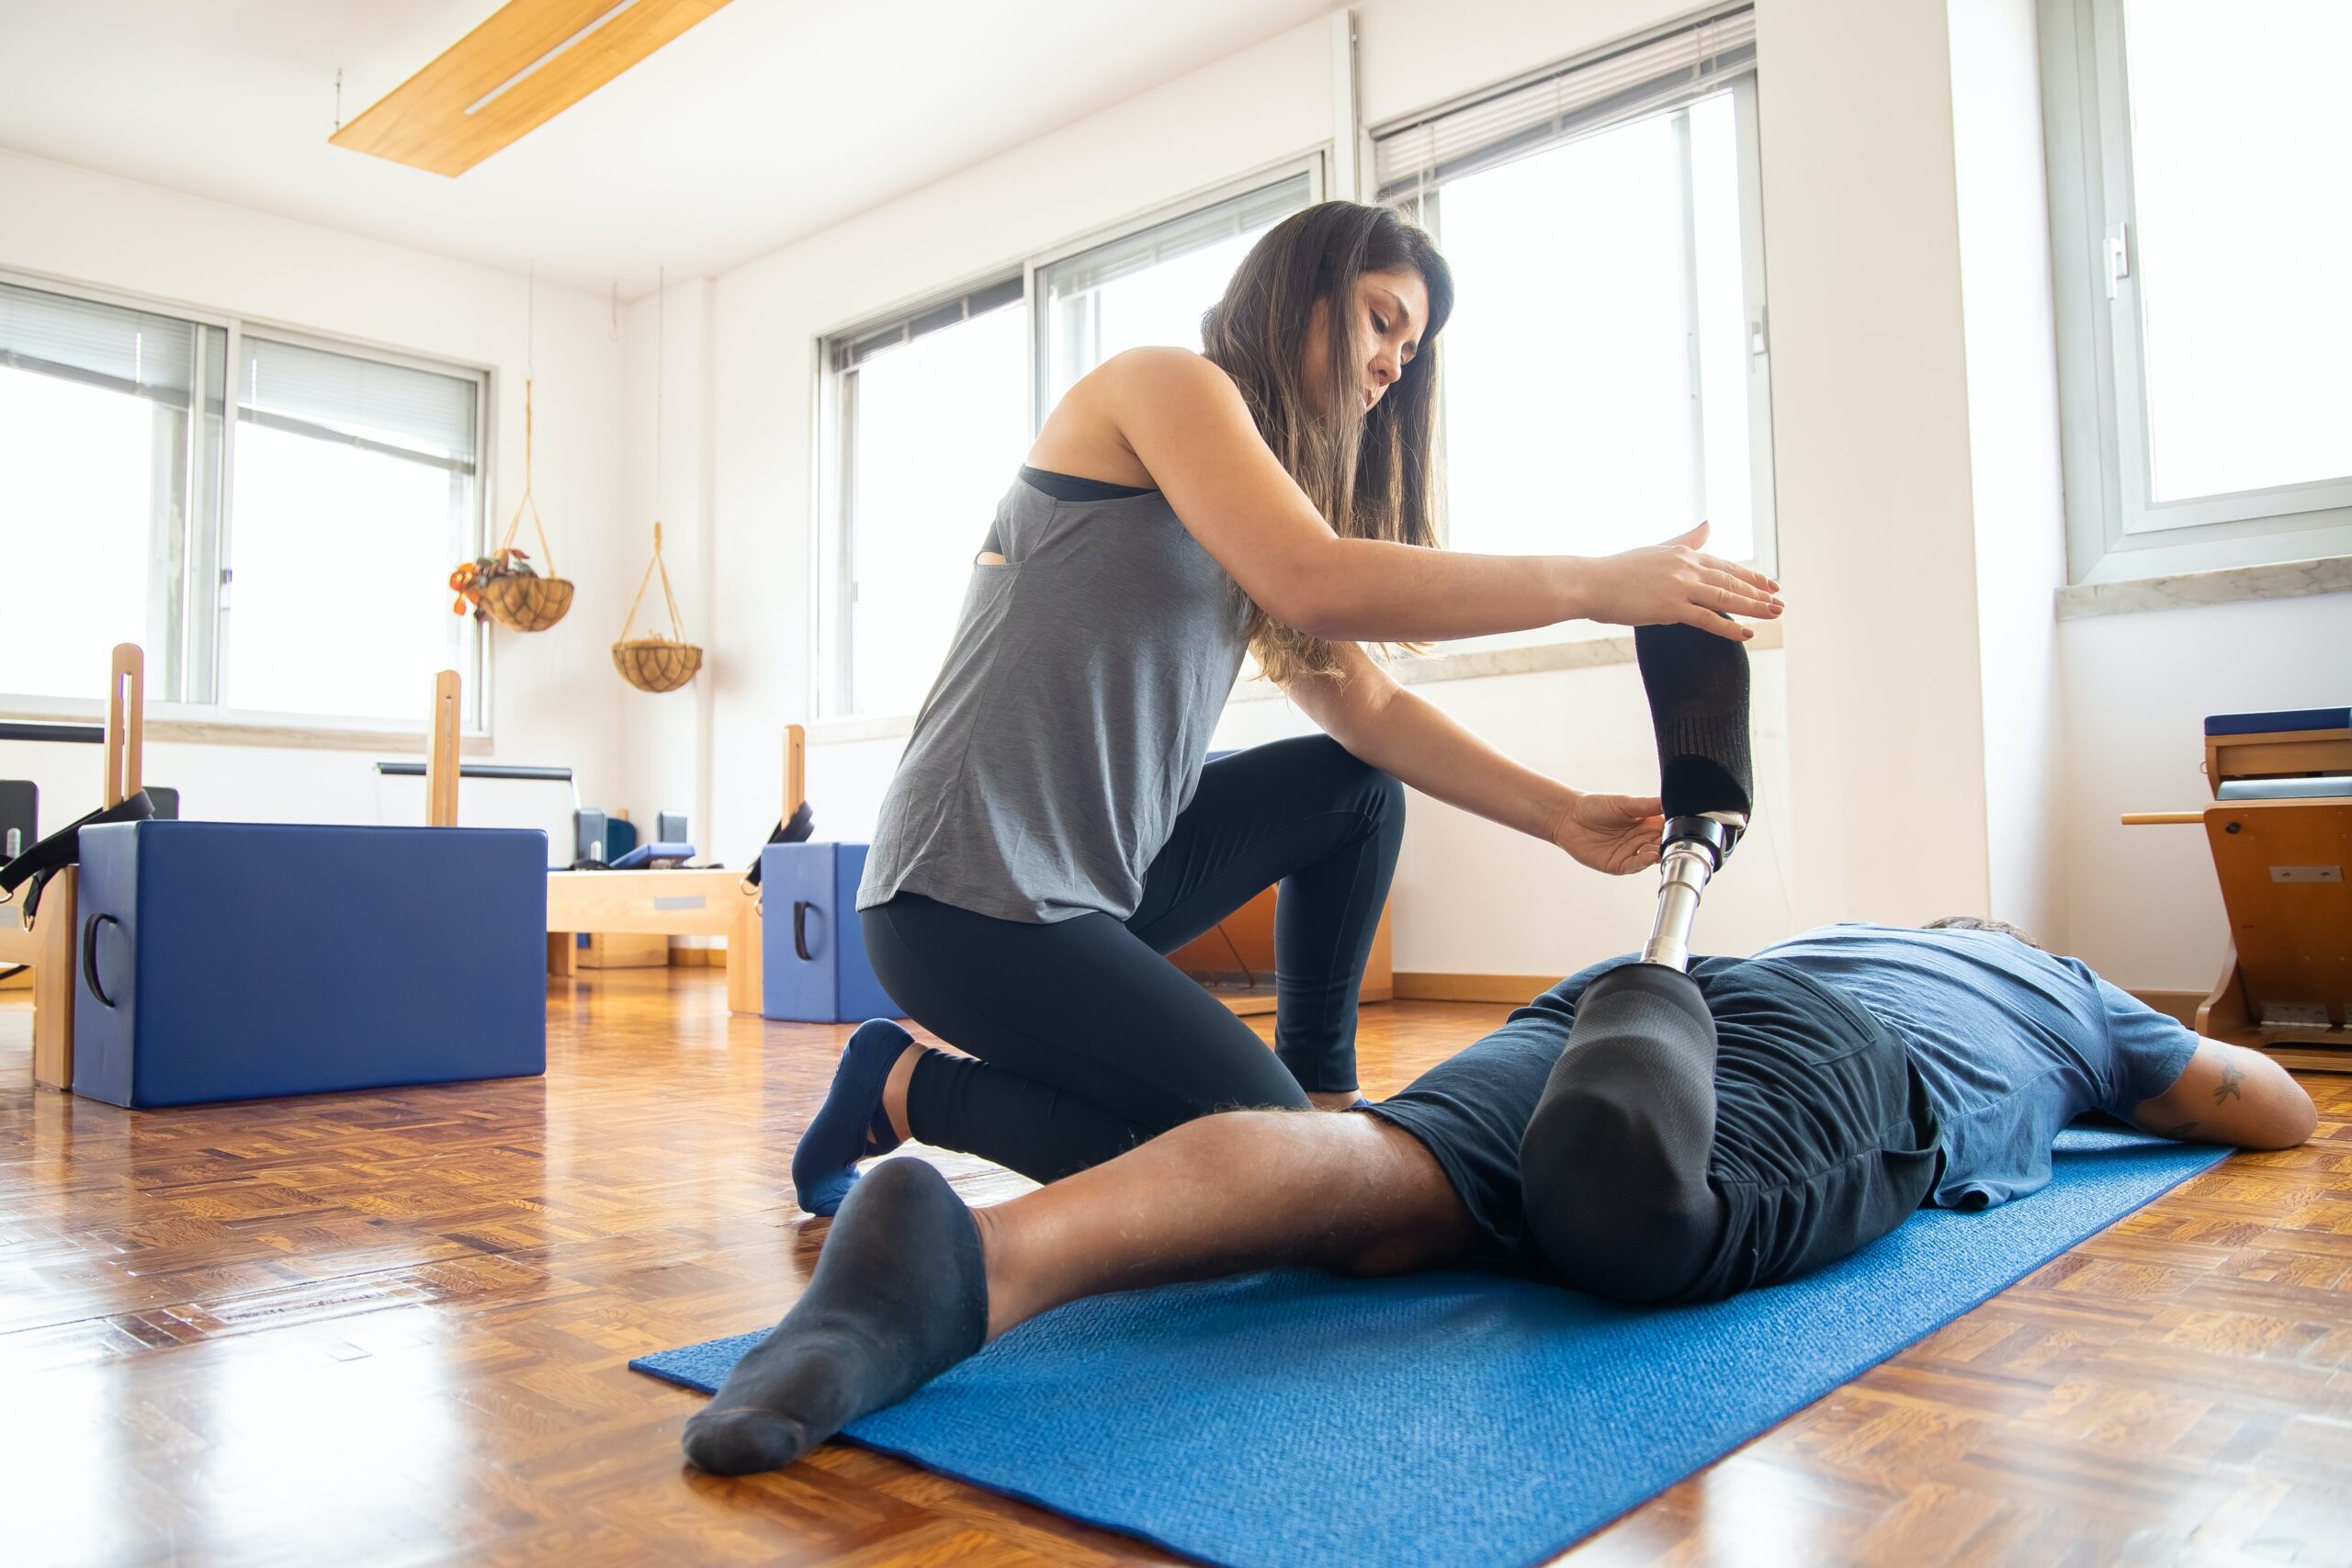 Does Going to Physical Therapy Help Your SSDI Claim?